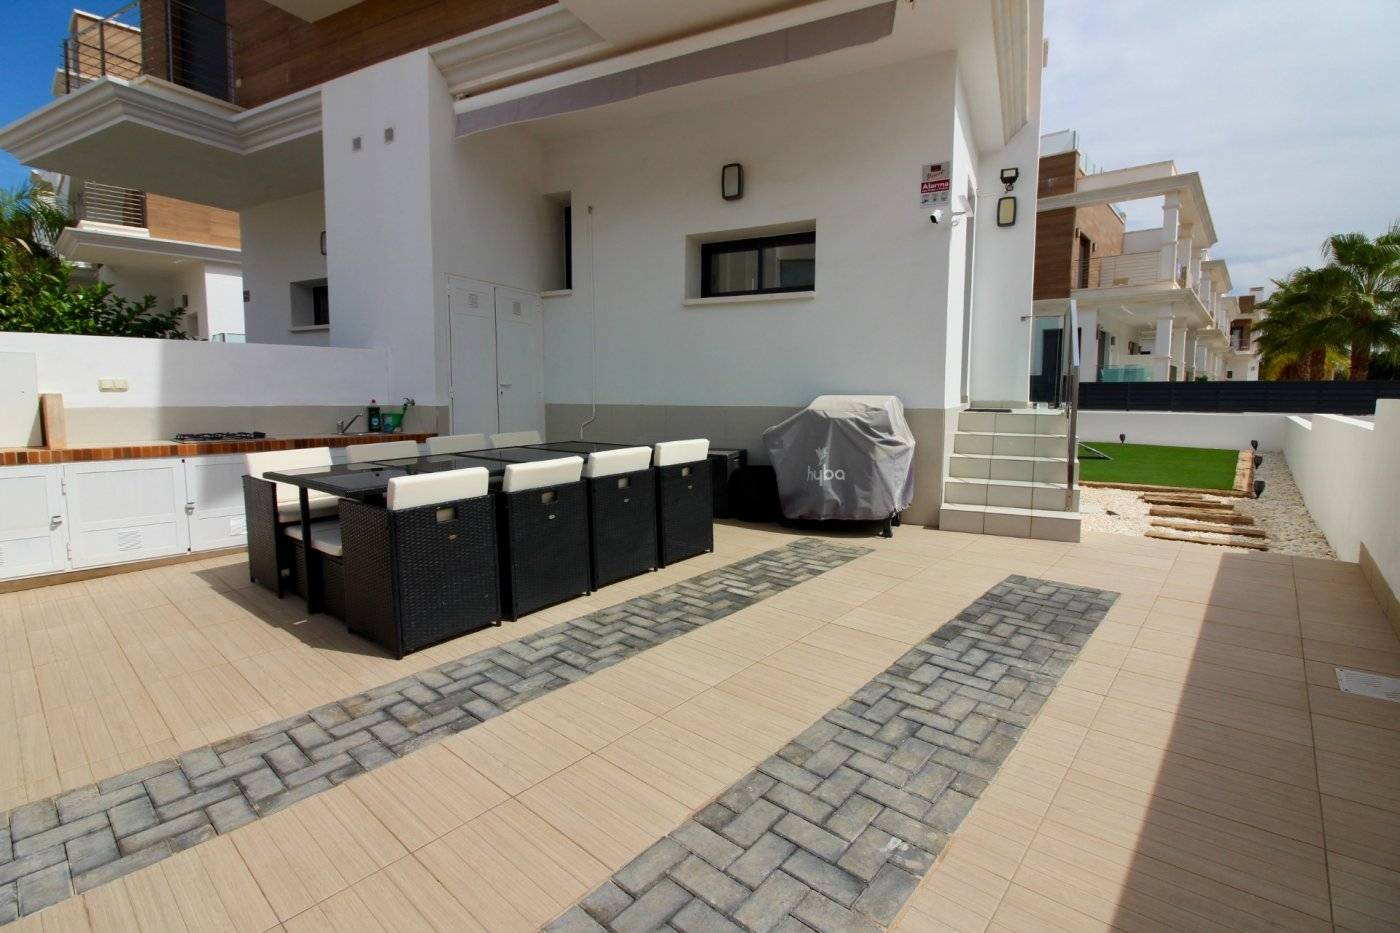 2 AND 2 FLOORS DUPLEX BUNGALOW AND PARKING IN CIUDAD QUESADA ROJALES